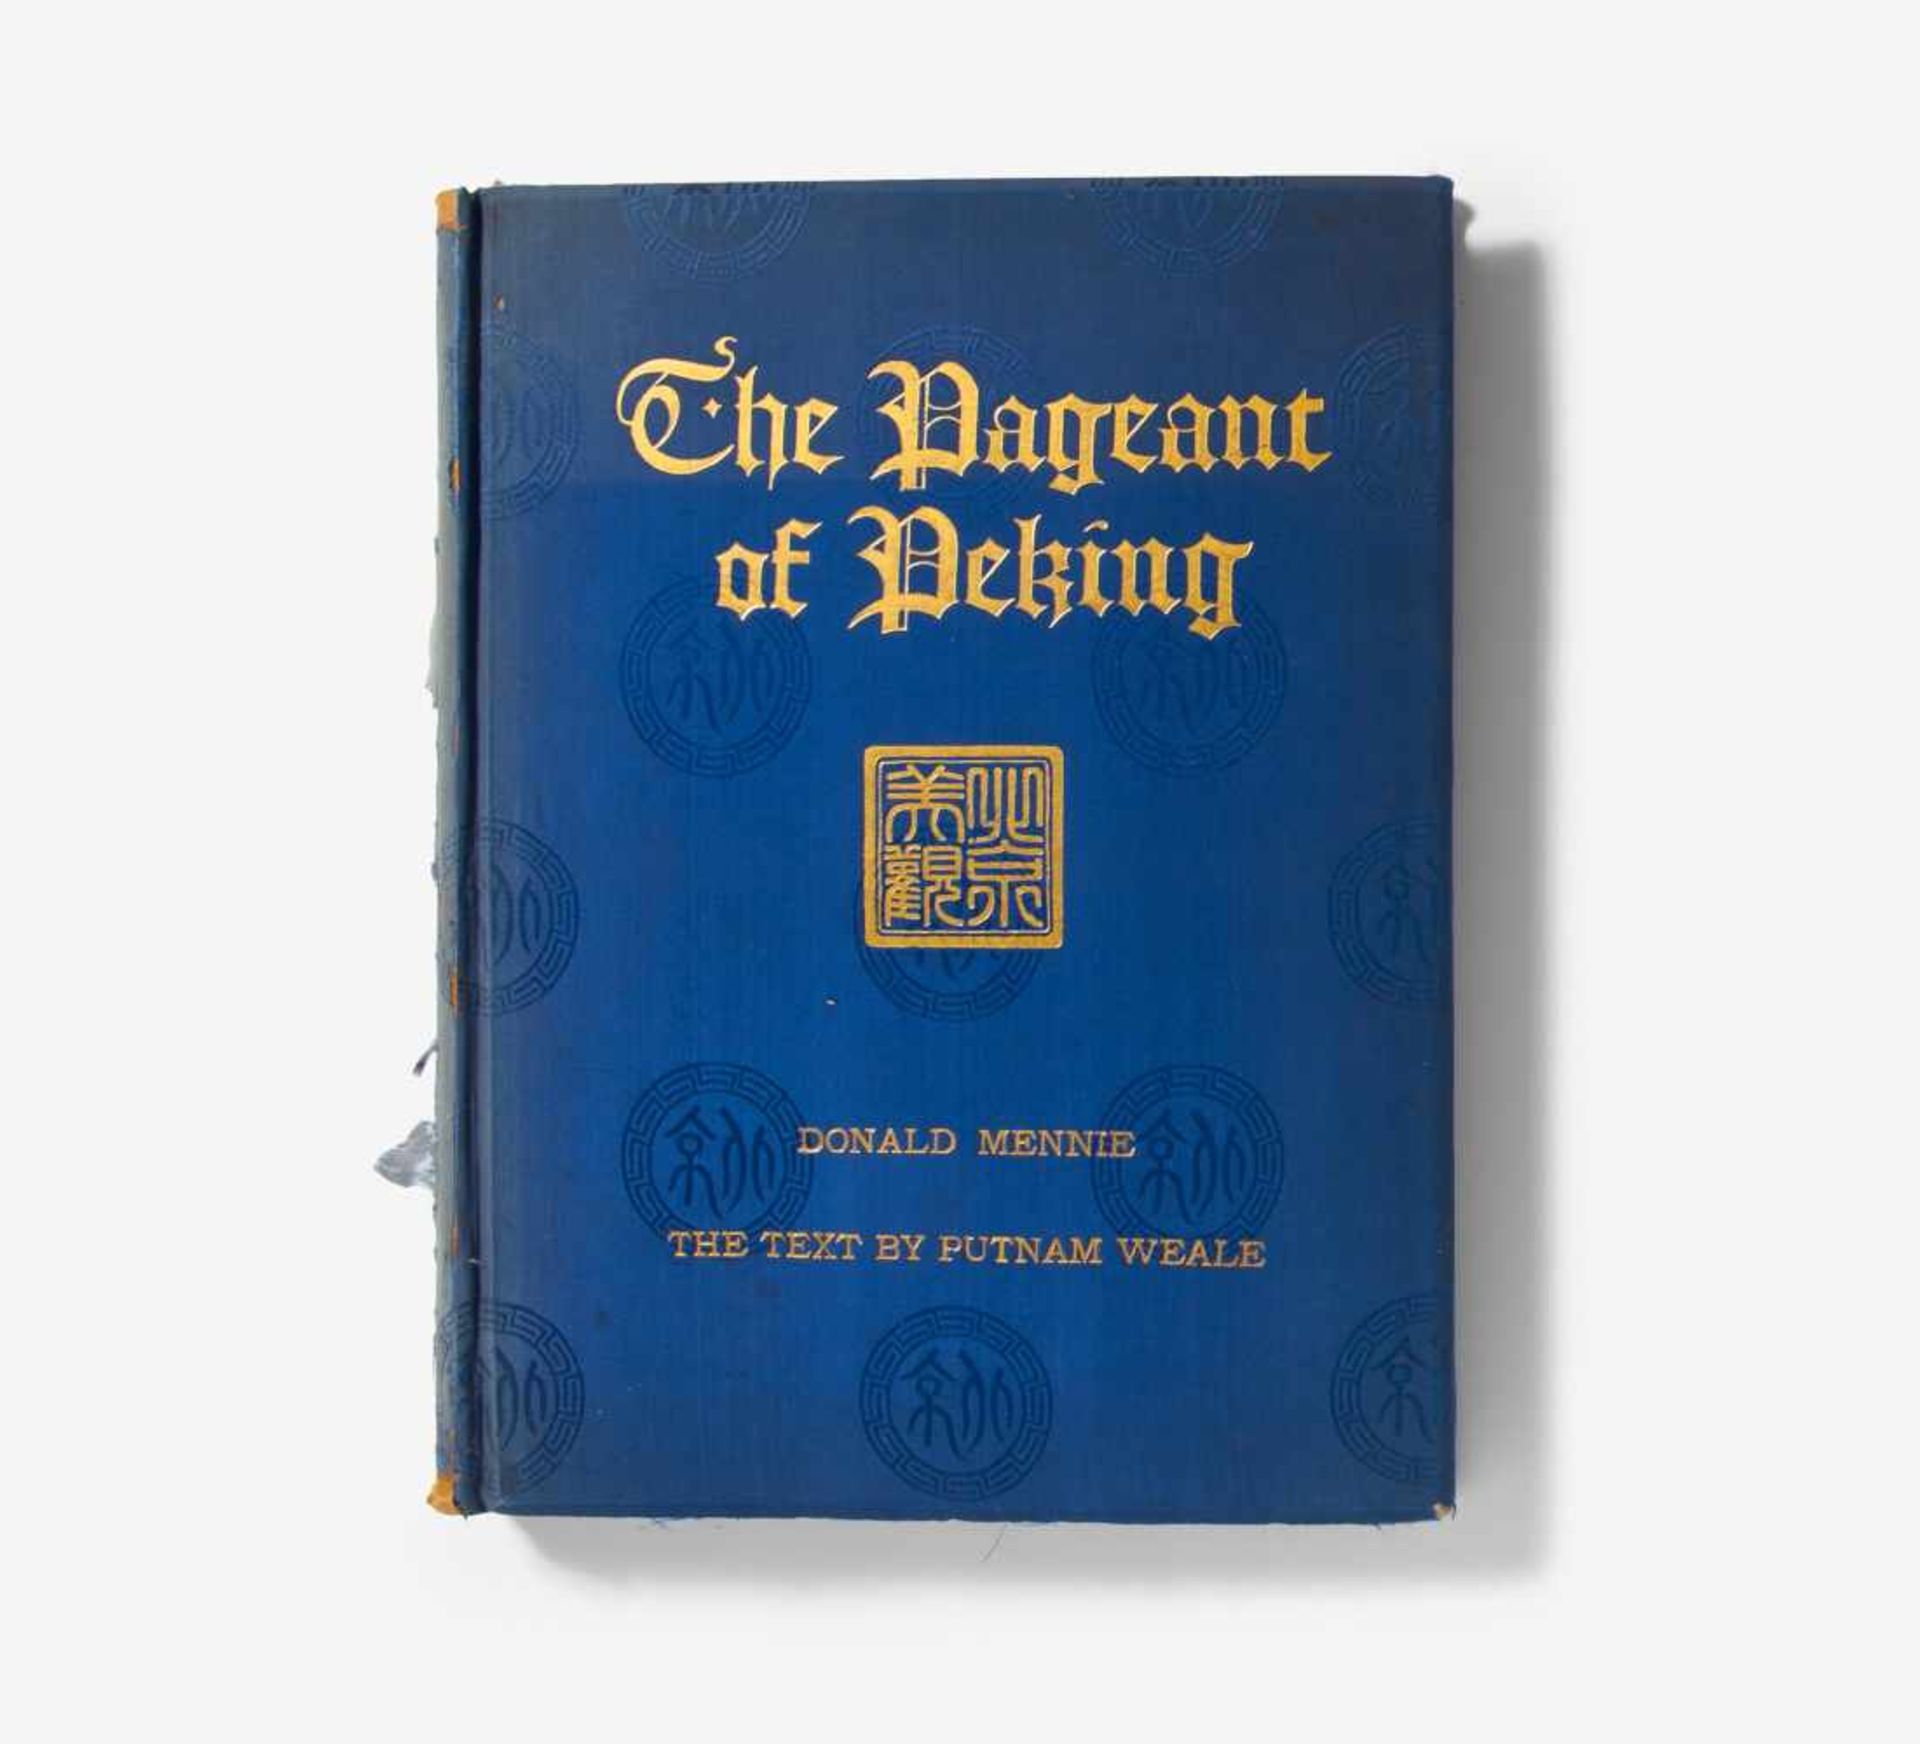 DONALD MEANNIE: THE PAGEANT OF PEKING.